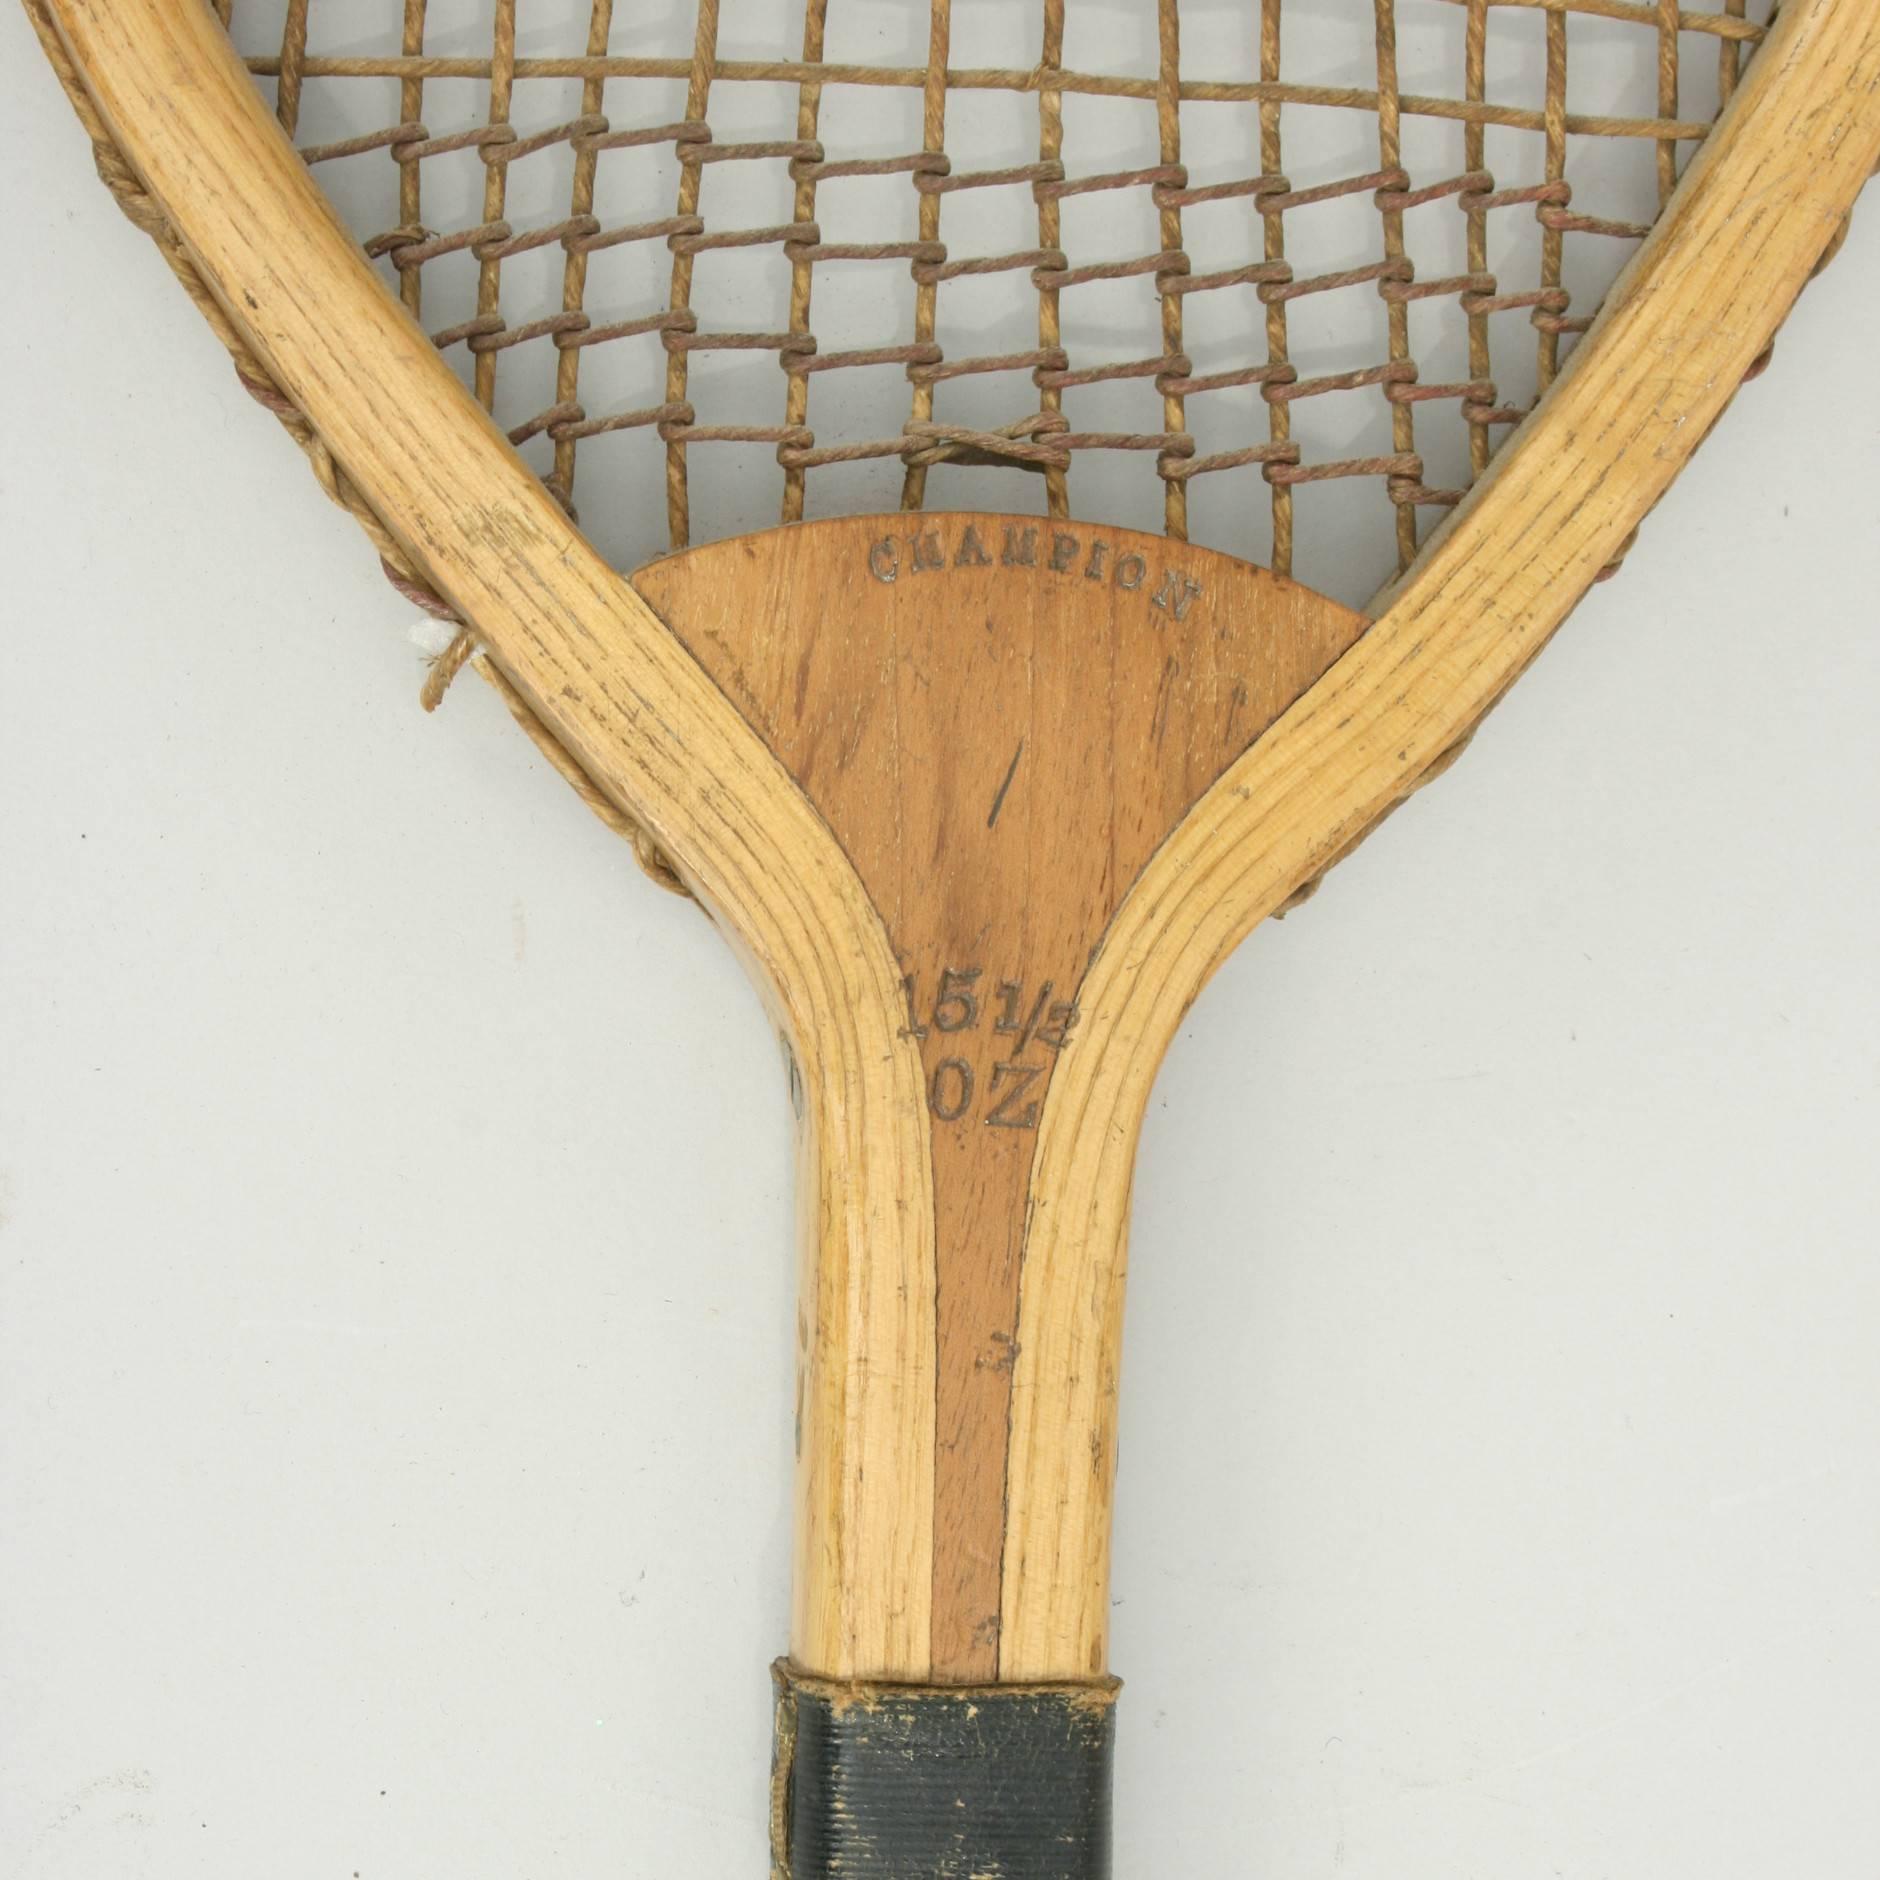 Antique lawn tennis racket. 
A wonderful 19th century ash framed lawn tennis racket, 'Champion' with original thick gut stringing (some damage) and trebling on top and bottom. The cedar wood handle, with thin grooves and a black leather collar with